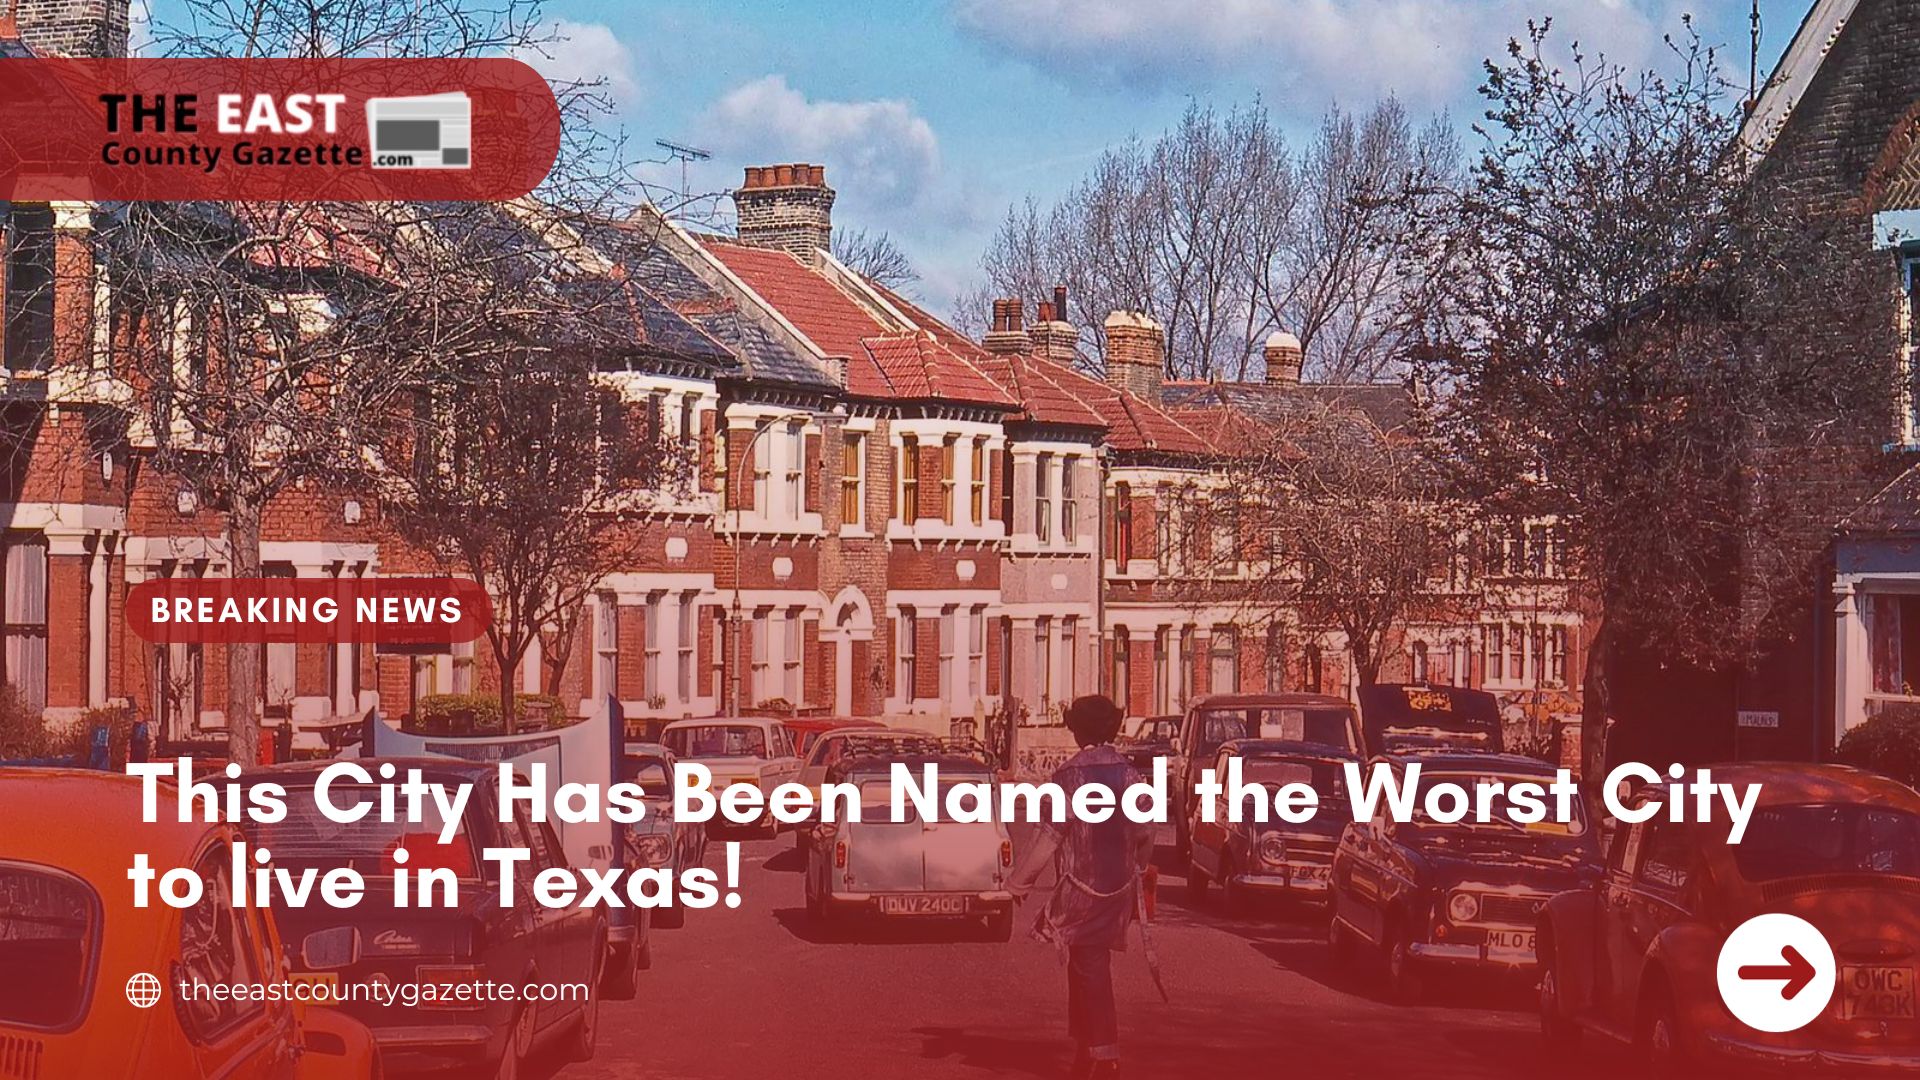 This City Has Been Named the Worst City to live in Texas! The East